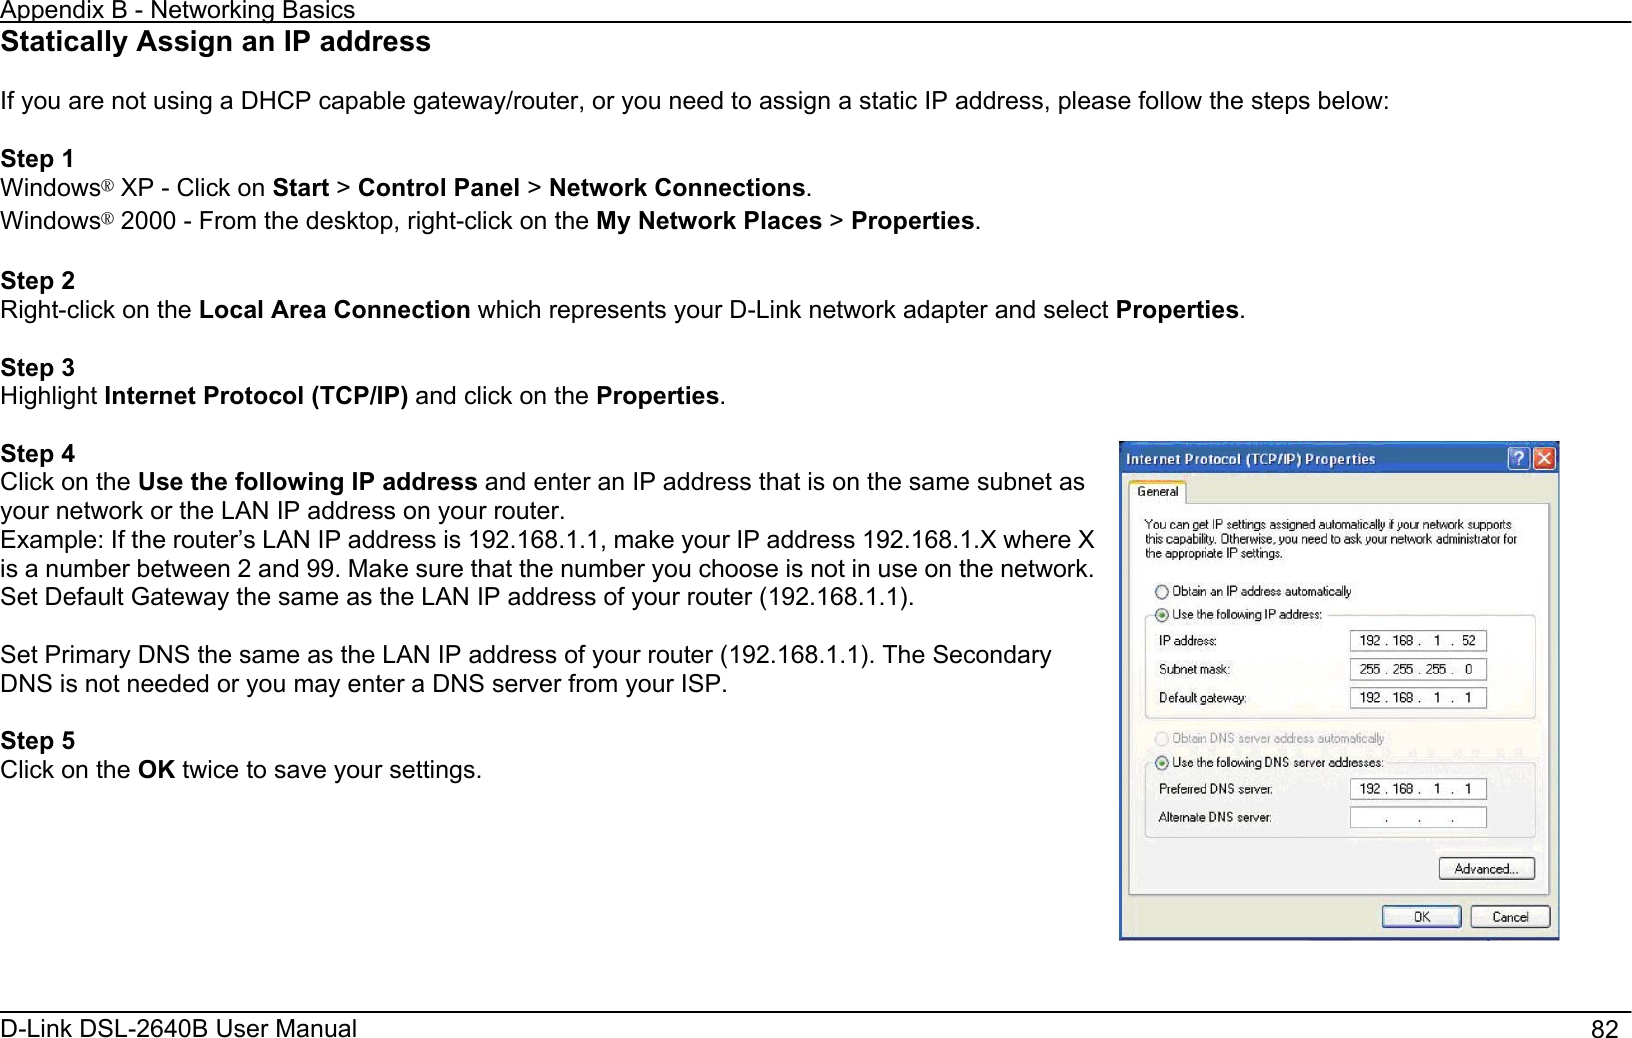 Appendix B - Networking Basics D-Link DSL-2640B User Manual                                       82Statically Assign an IP address If you are not using a DHCP capable gateway/router, or you need to assign a static IP address, please follow the steps below: Step 1 Windows¯ XP - Click on Start &gt;Control Panel &gt;Network Connections.Windows¯ 2000 - From the desktop, right-click on the My Network Places &gt;Properties.Step 2 Right-click on the Local Area Connection which represents your D-Link network adapter and select Properties.Step 3 Highlight Internet Protocol (TCP/IP) and click on the Properties.Step 4 Click on the Use the following IP address and enter an IP address that is on the same subnet as your network or the LAN IP address on your router. Example: If the router’s LAN IP address is 192.168.1.1, make your IP address 192.168.1.X where X is a number between 2 and 99. Make sure that the number you choose is not in use on the network. Set Default Gateway the same as the LAN IP address of your router (192.168.1.1). Set Primary DNS the same as the LAN IP address of your router (192.168.1.1). The Secondary DNS is not needed or you may enter a DNS server from your ISP. Step 5 Click on the OK twice to save your settings. 